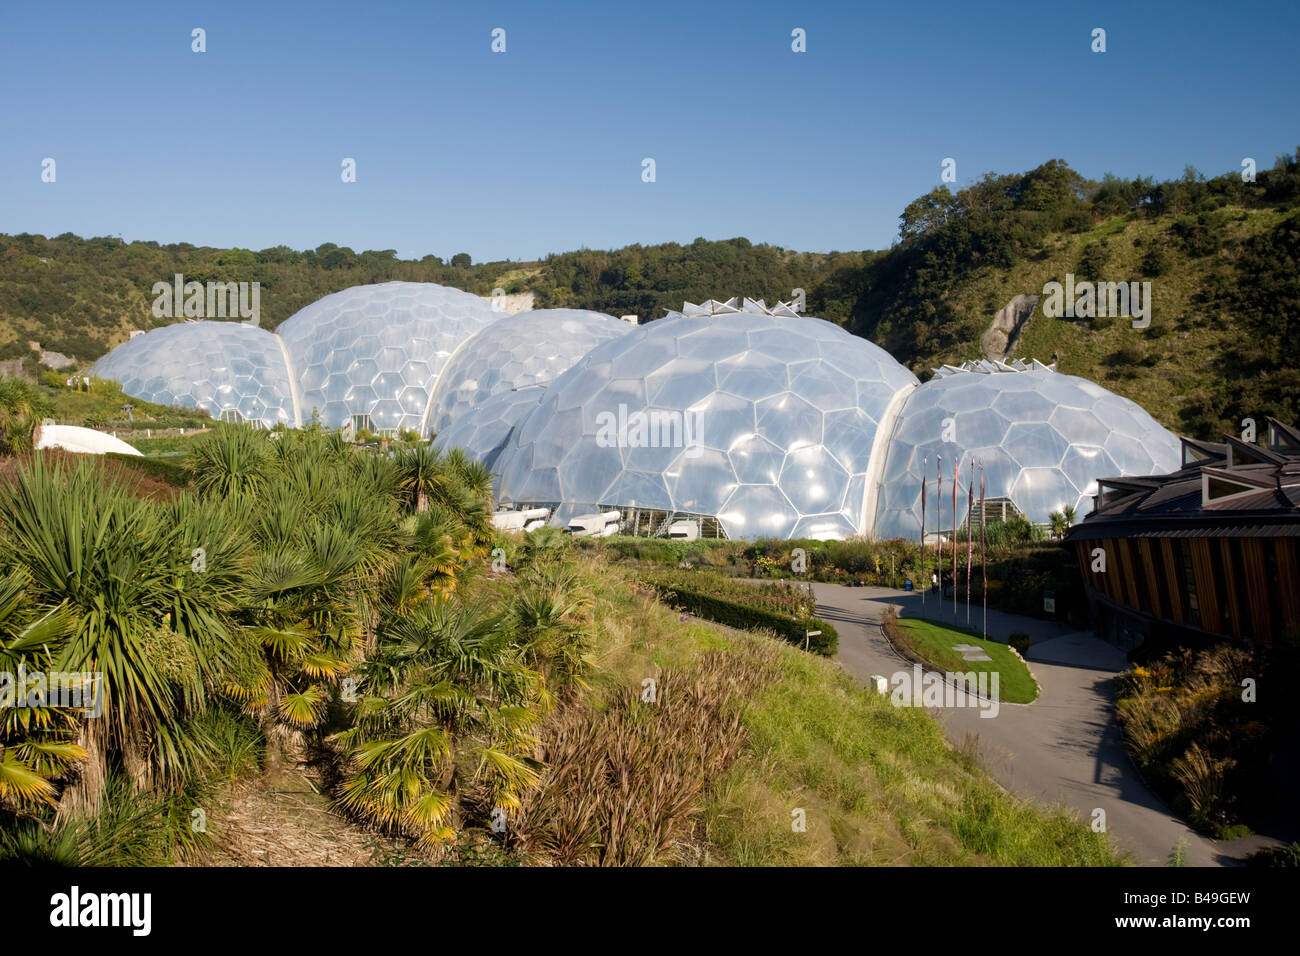 Giant enclosed biomes Eden Project Bodelva St Austell Cornwall UK Stock Photo